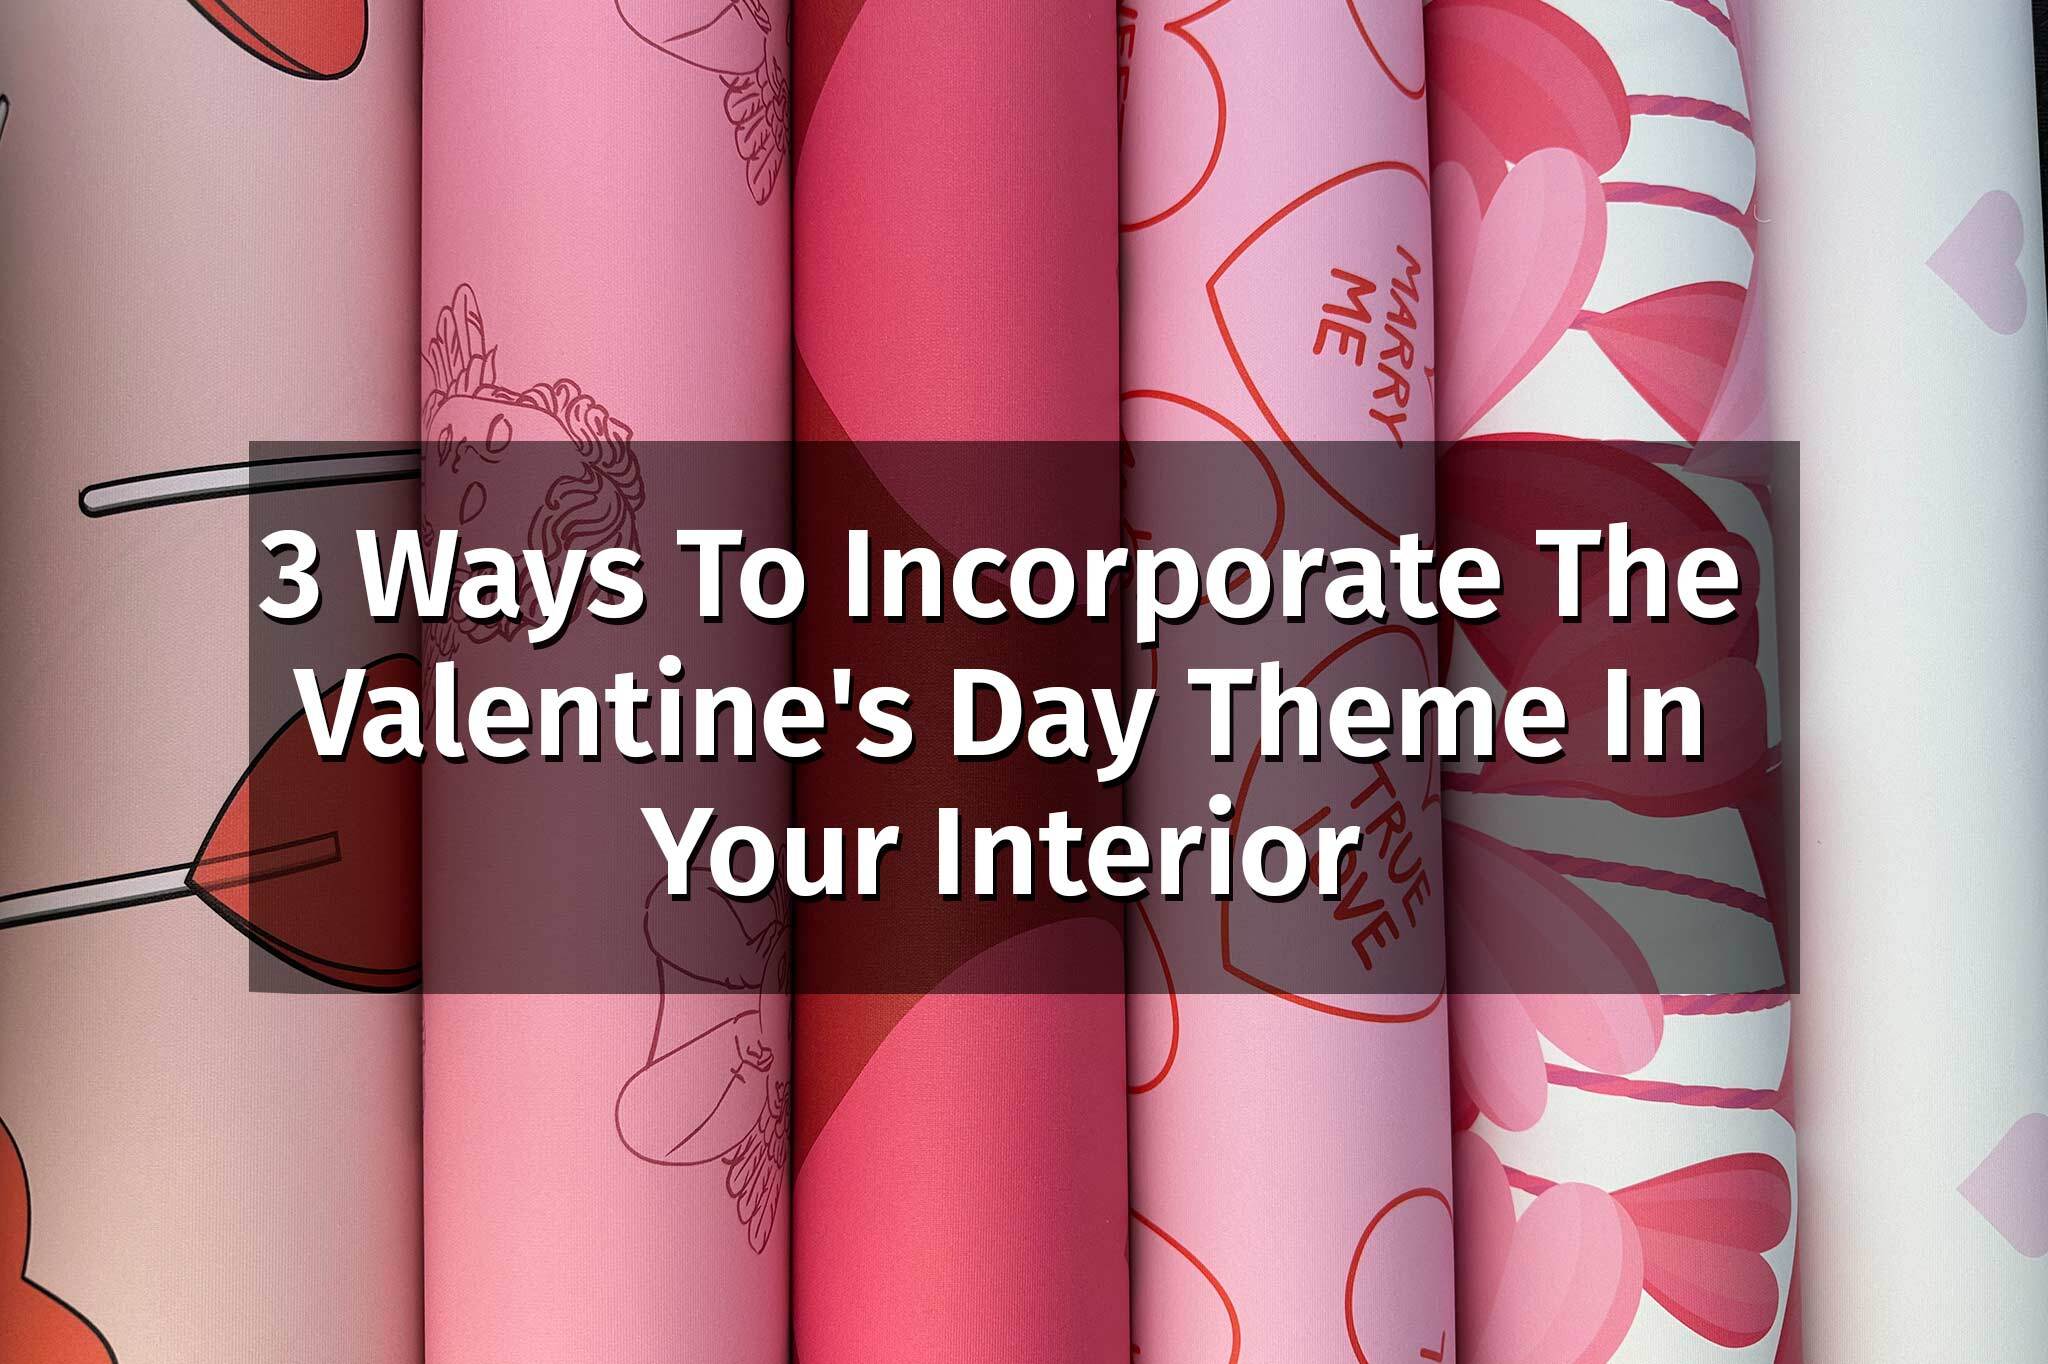 3 ways to incorporate valentines theme in your interior